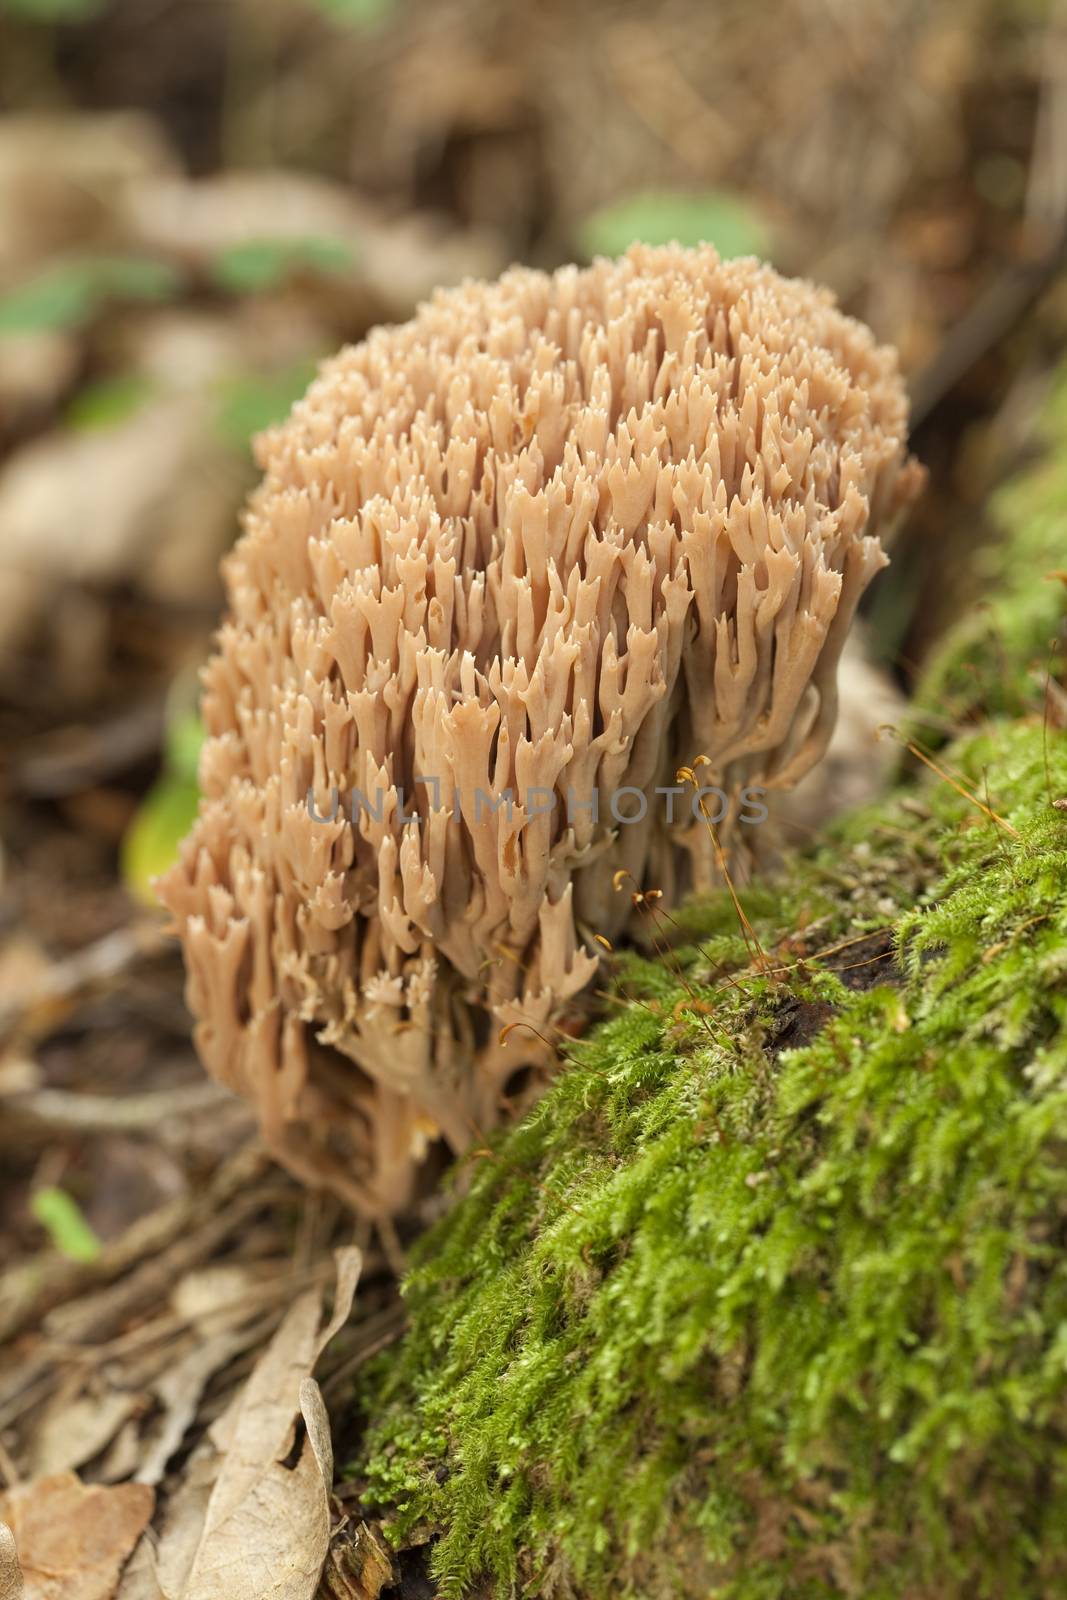 inedible coral fungus(Ramaria stricta) on moss